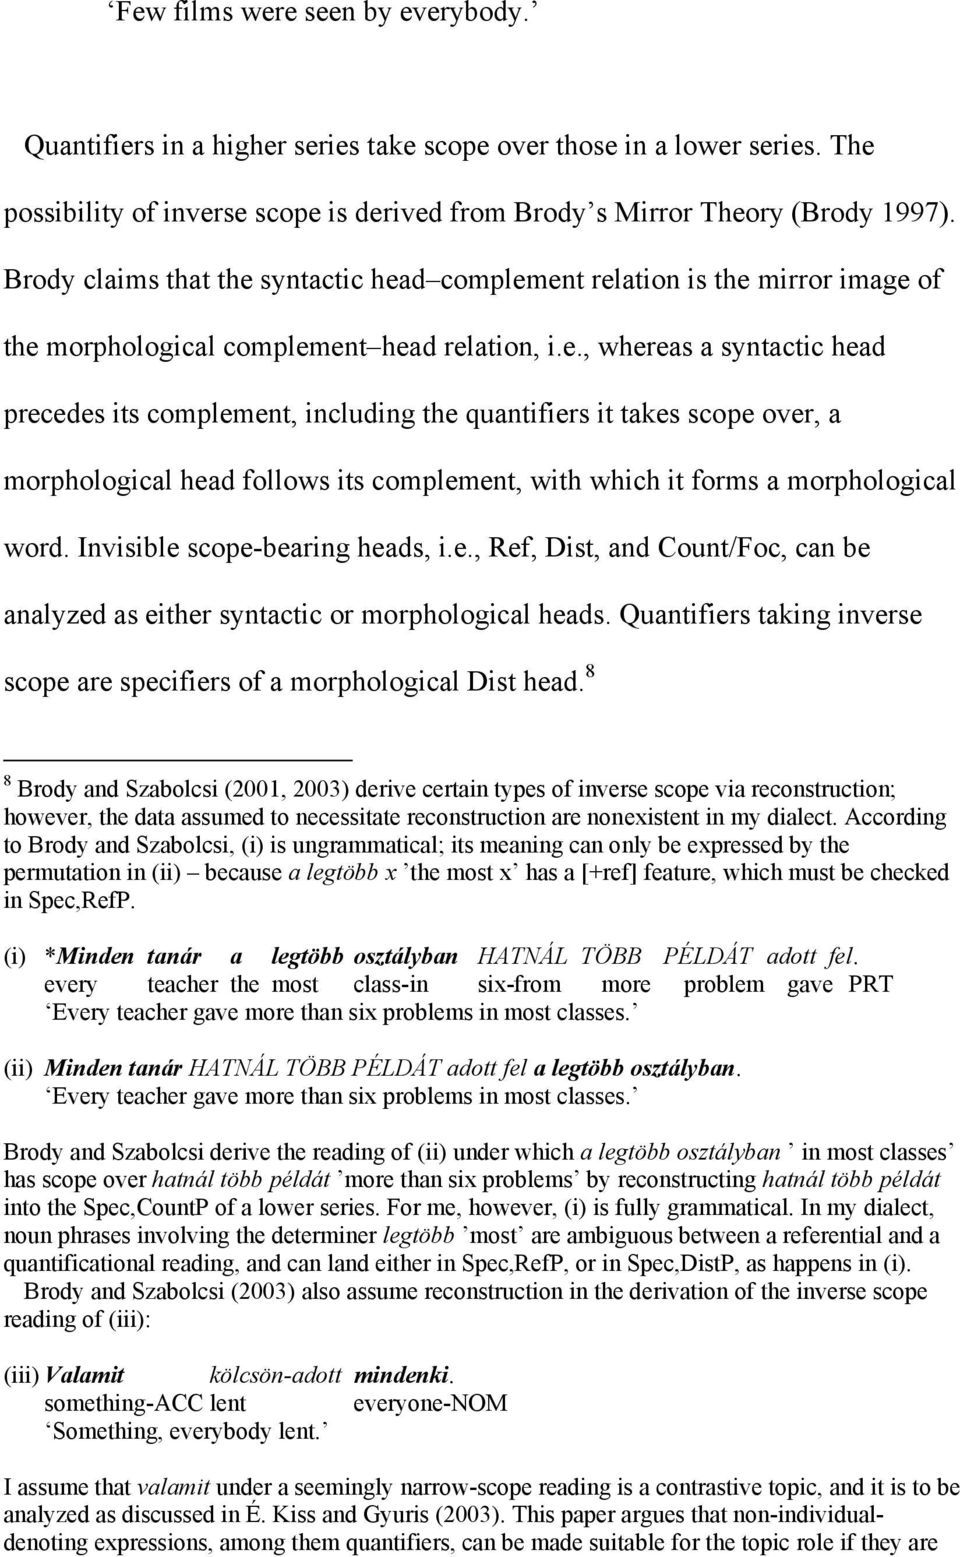 syntactic head complement relation is the mirror image of the morphological complement head relation, i.e., whereas a syntactic head precedes its complement, including the quantifiers it takes scope over, a morphological head follows its complement, with which it forms a morphological word.